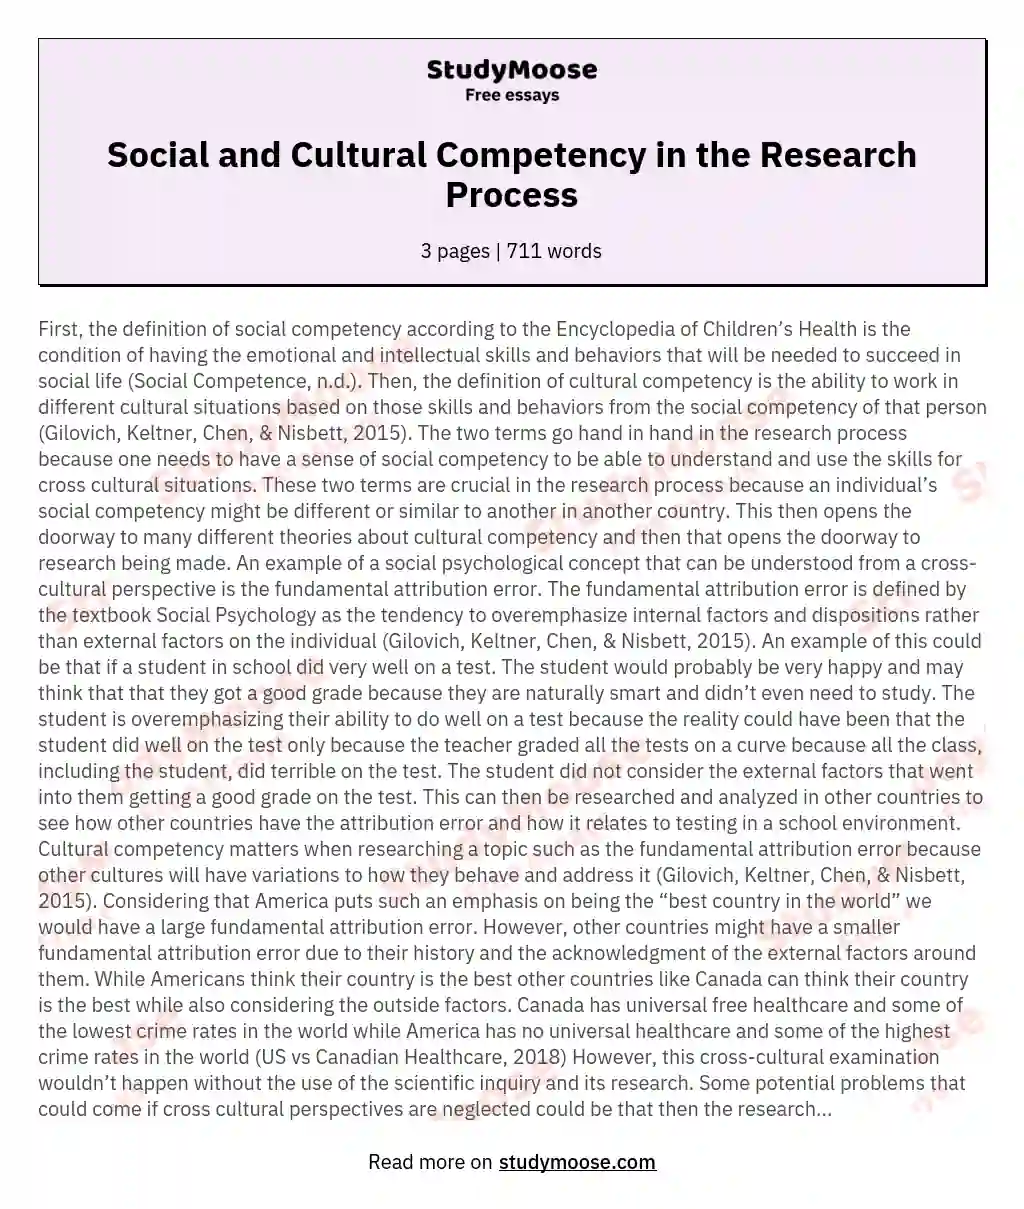 Social and Cultural Competency in the Research Process essay